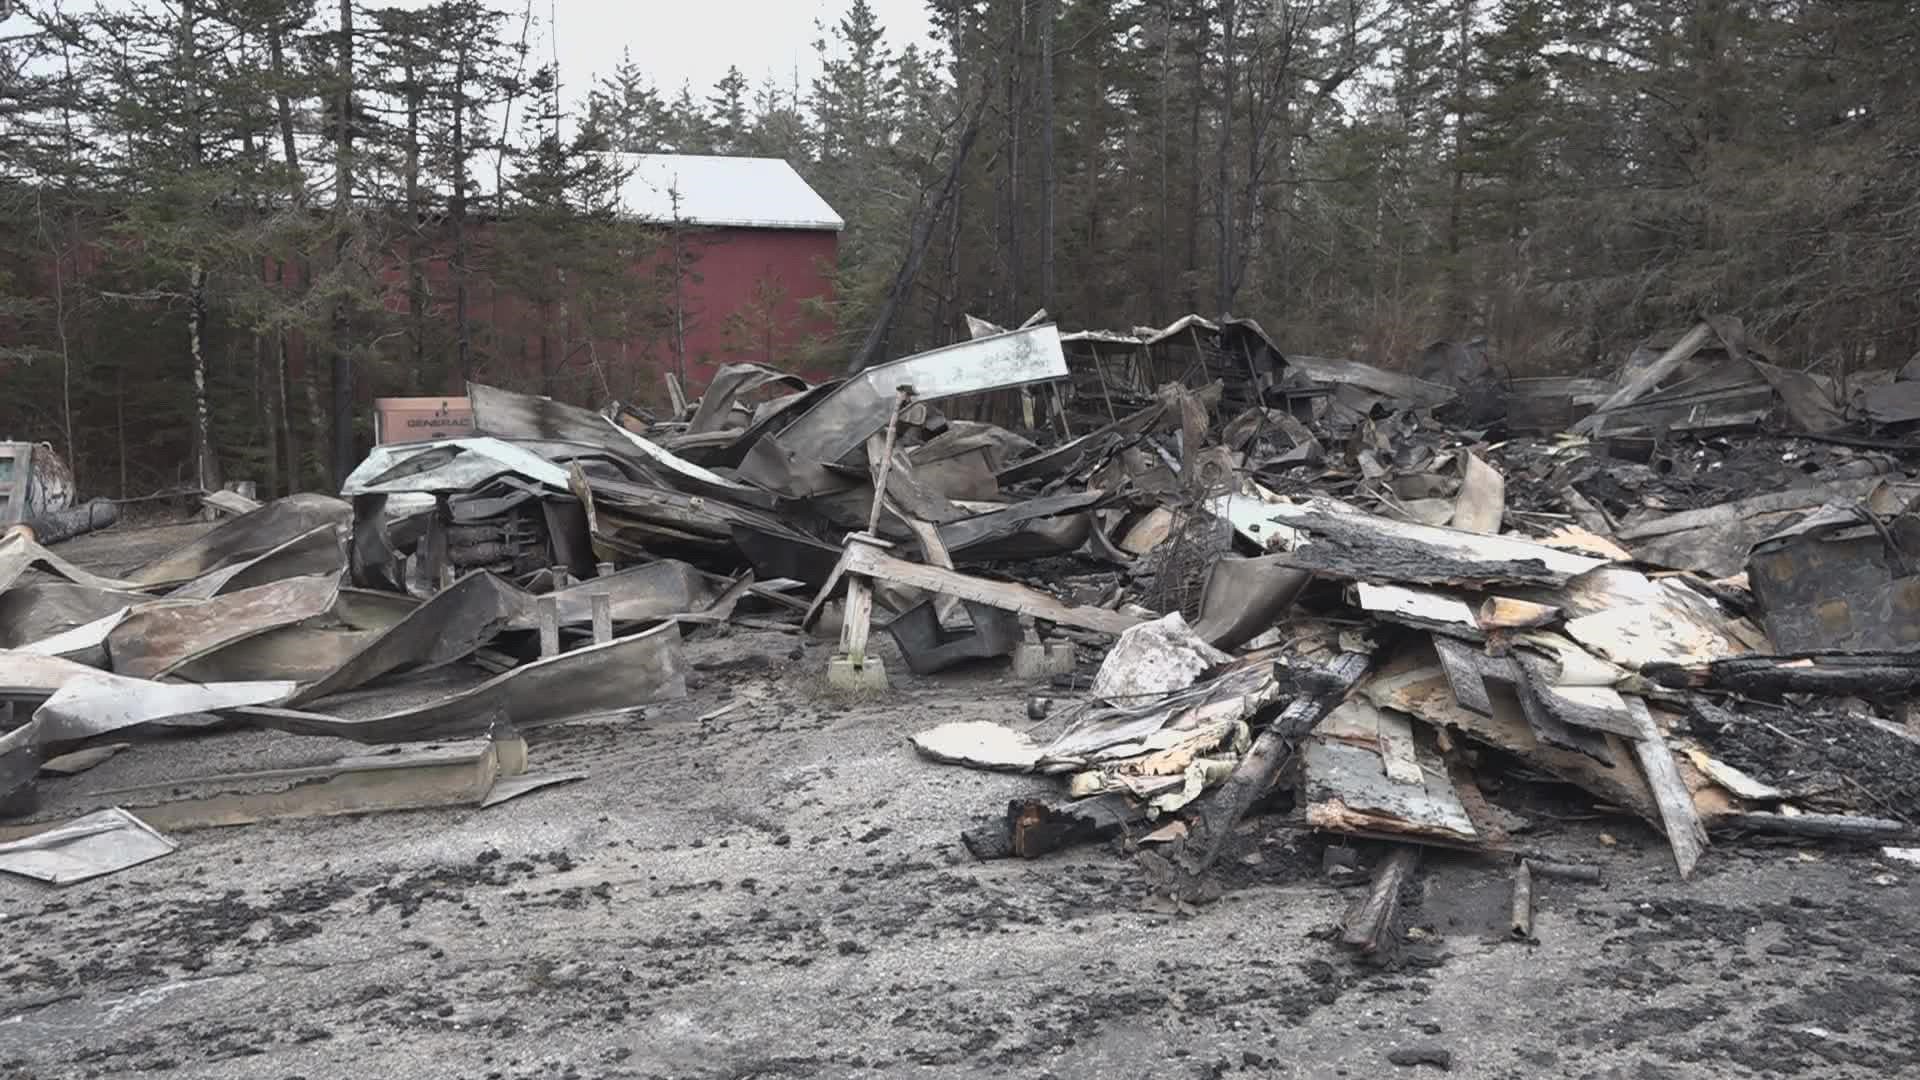 It was the only general store serving the community on the island, which is only accessible by ferry. The owners said they already plan to rebuild.